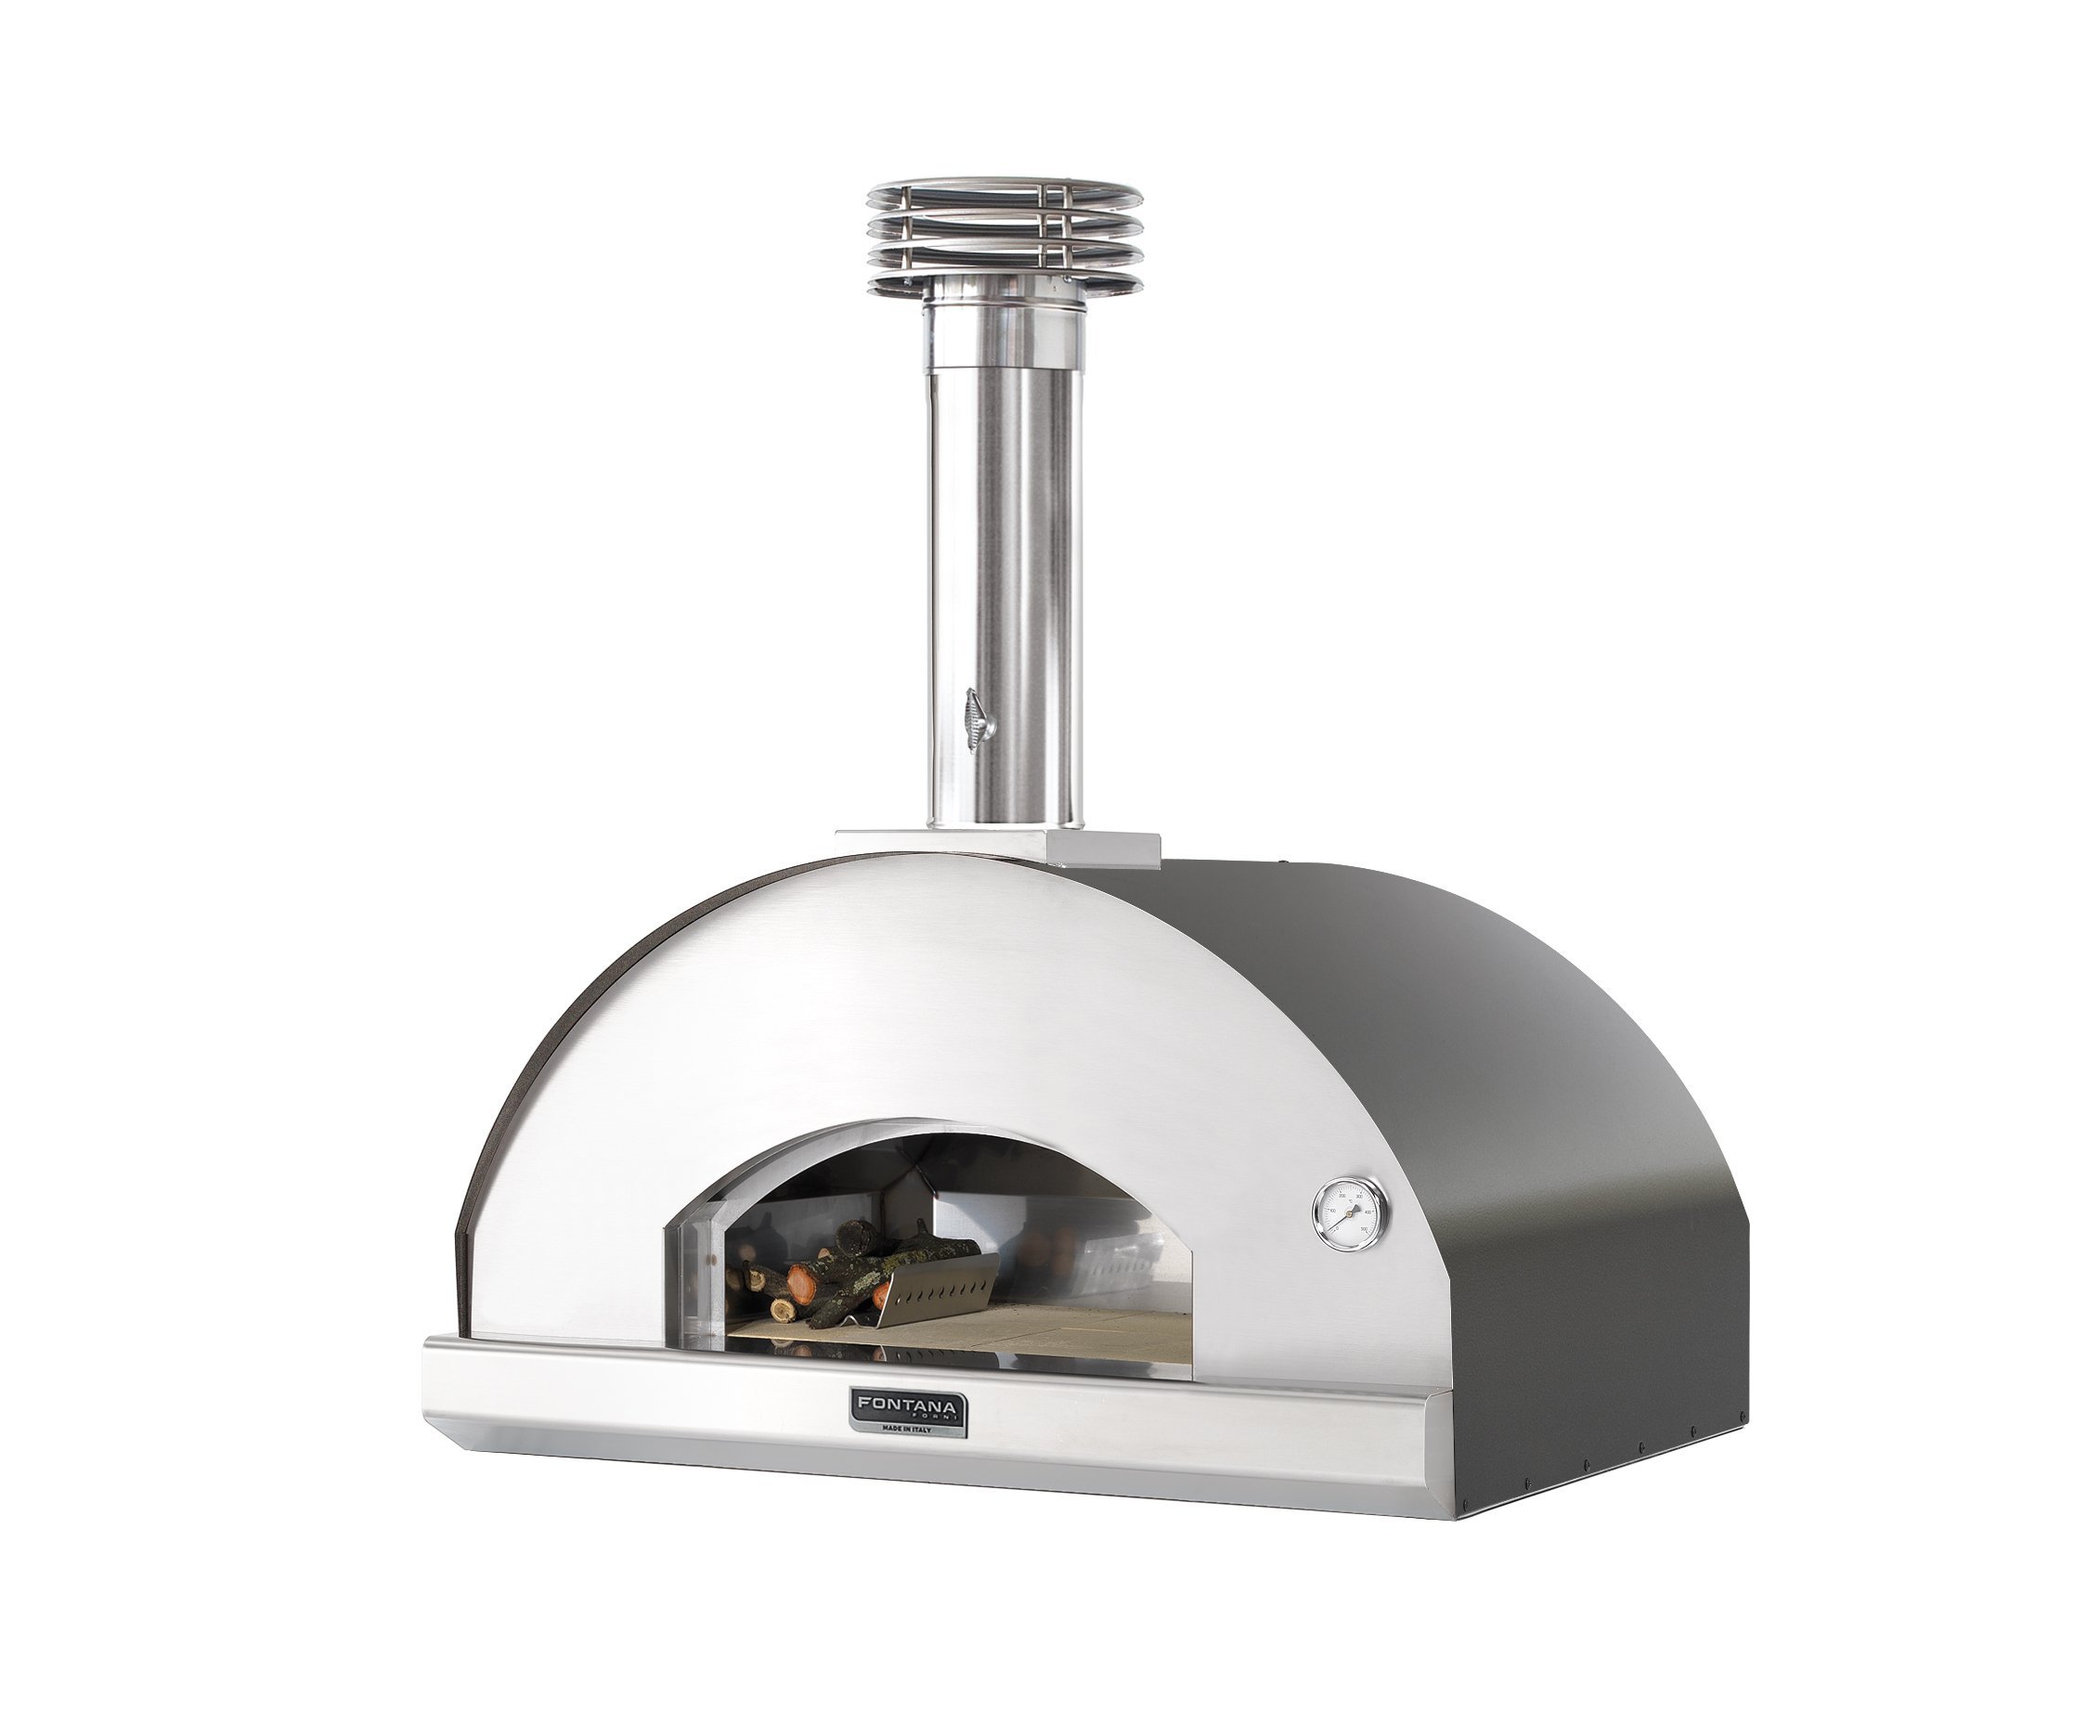 Dome oven Fontana Mangiafuoco with wood firing, pizza oven for outdoor kitchen